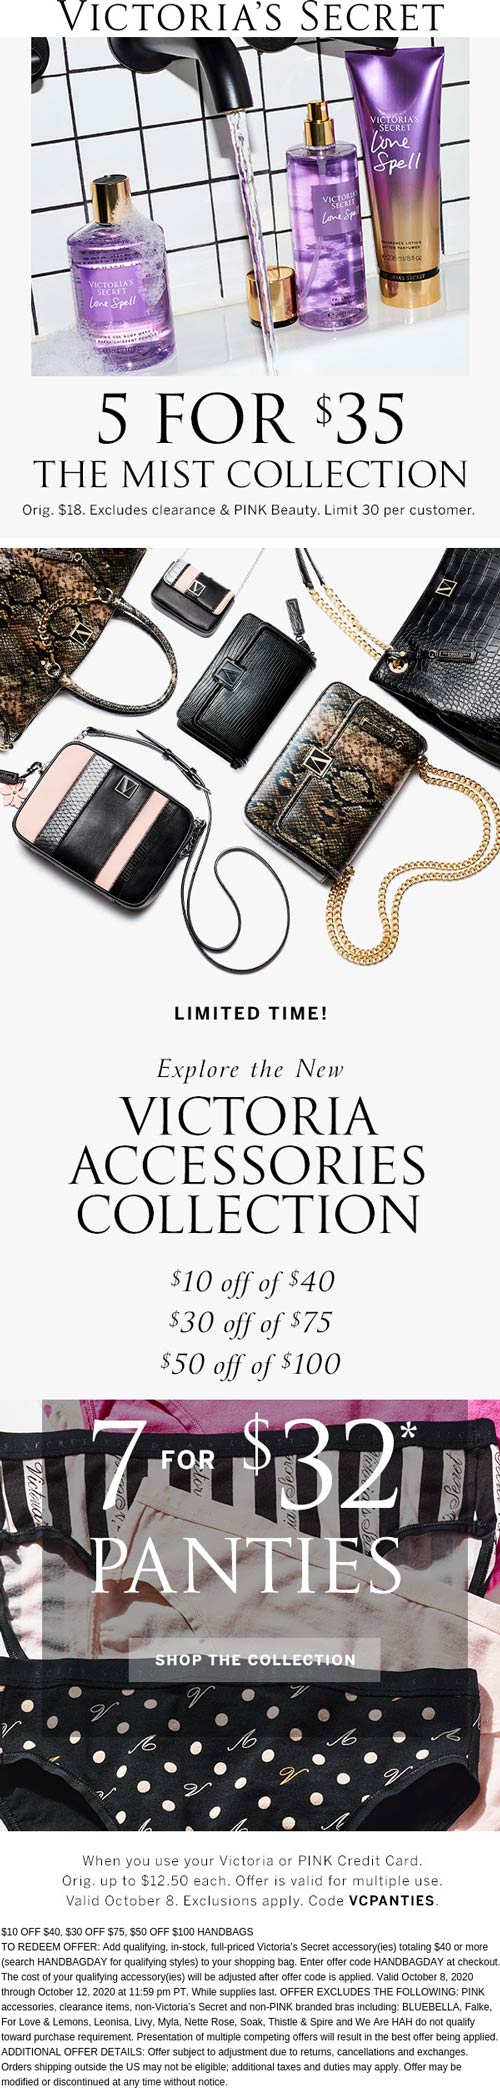 5 for 35 on mists & 1050 off 40+ on handbags and accessories at